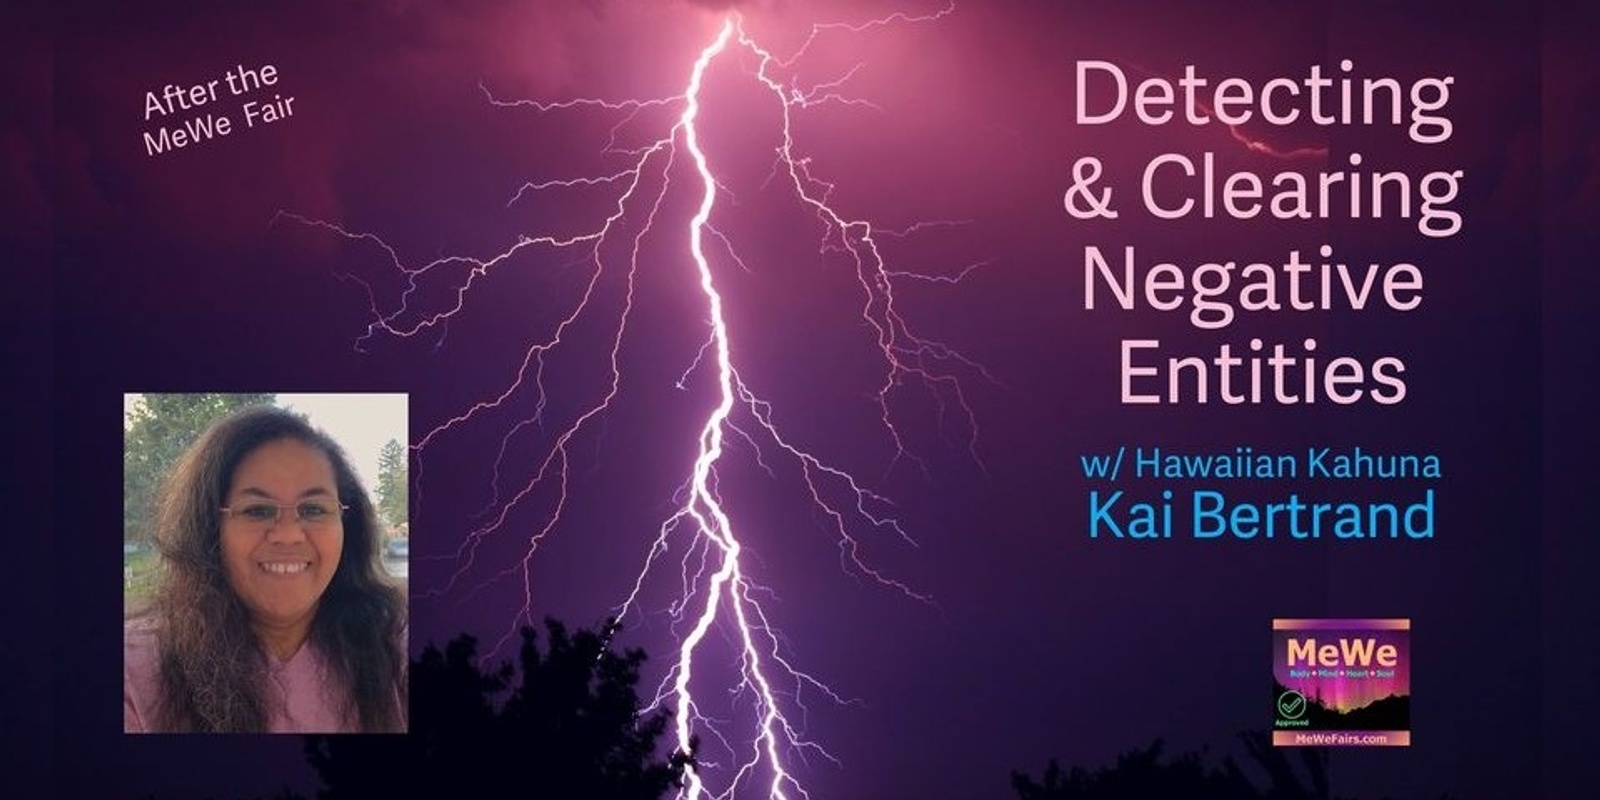 Detecting & Clearing Negative Entities with Kai Bertrand (after the MeWe Fair in Lynnwood)